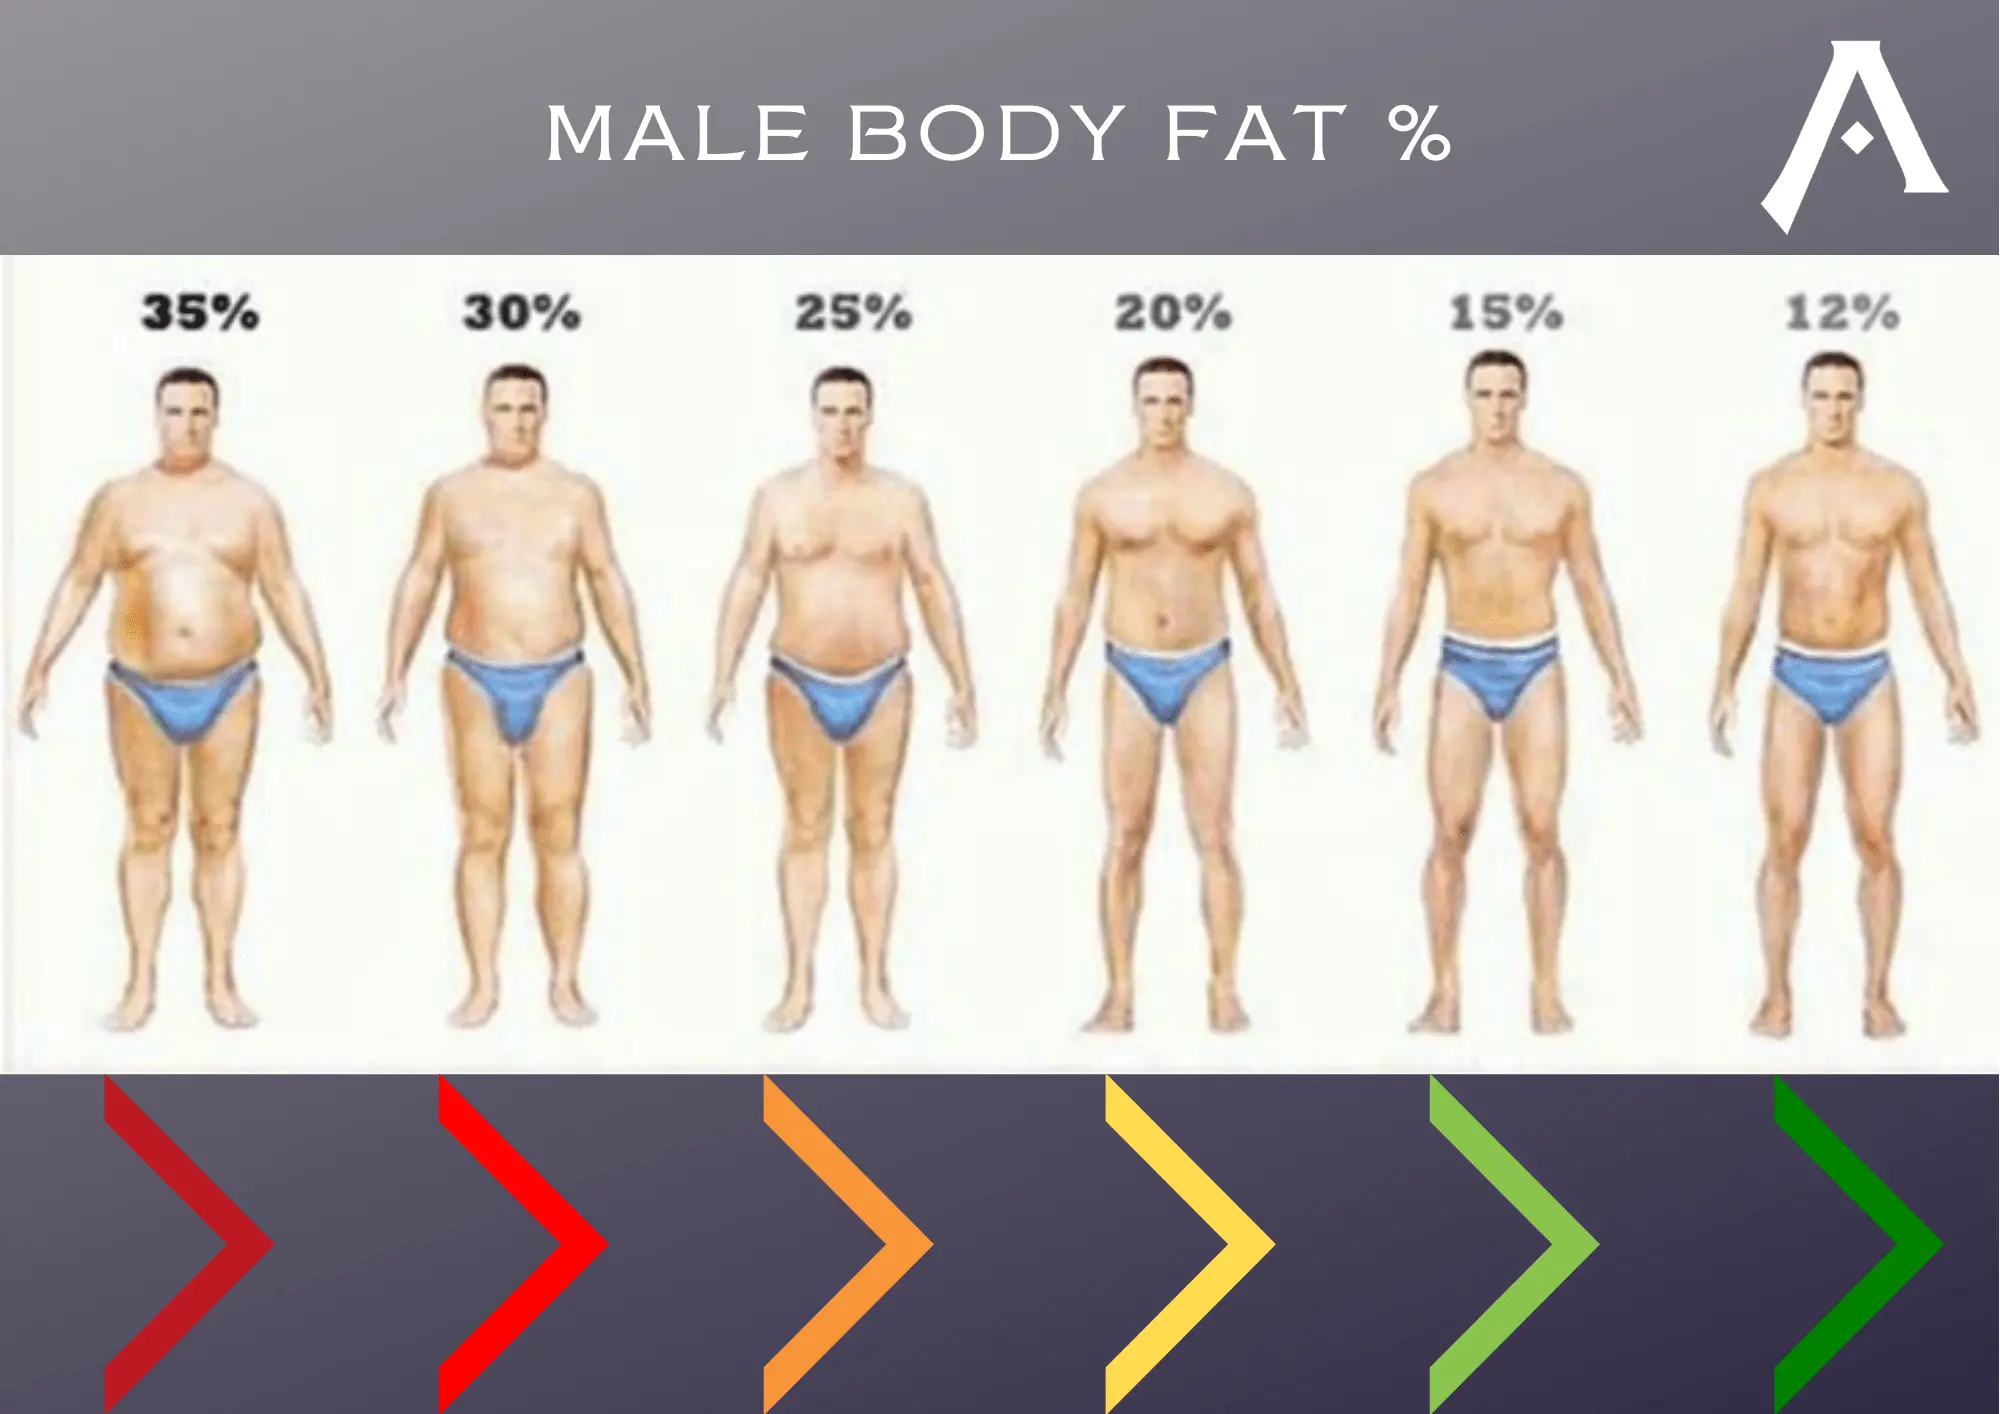 MALE BODY FAT % - Andy Jamieson PT